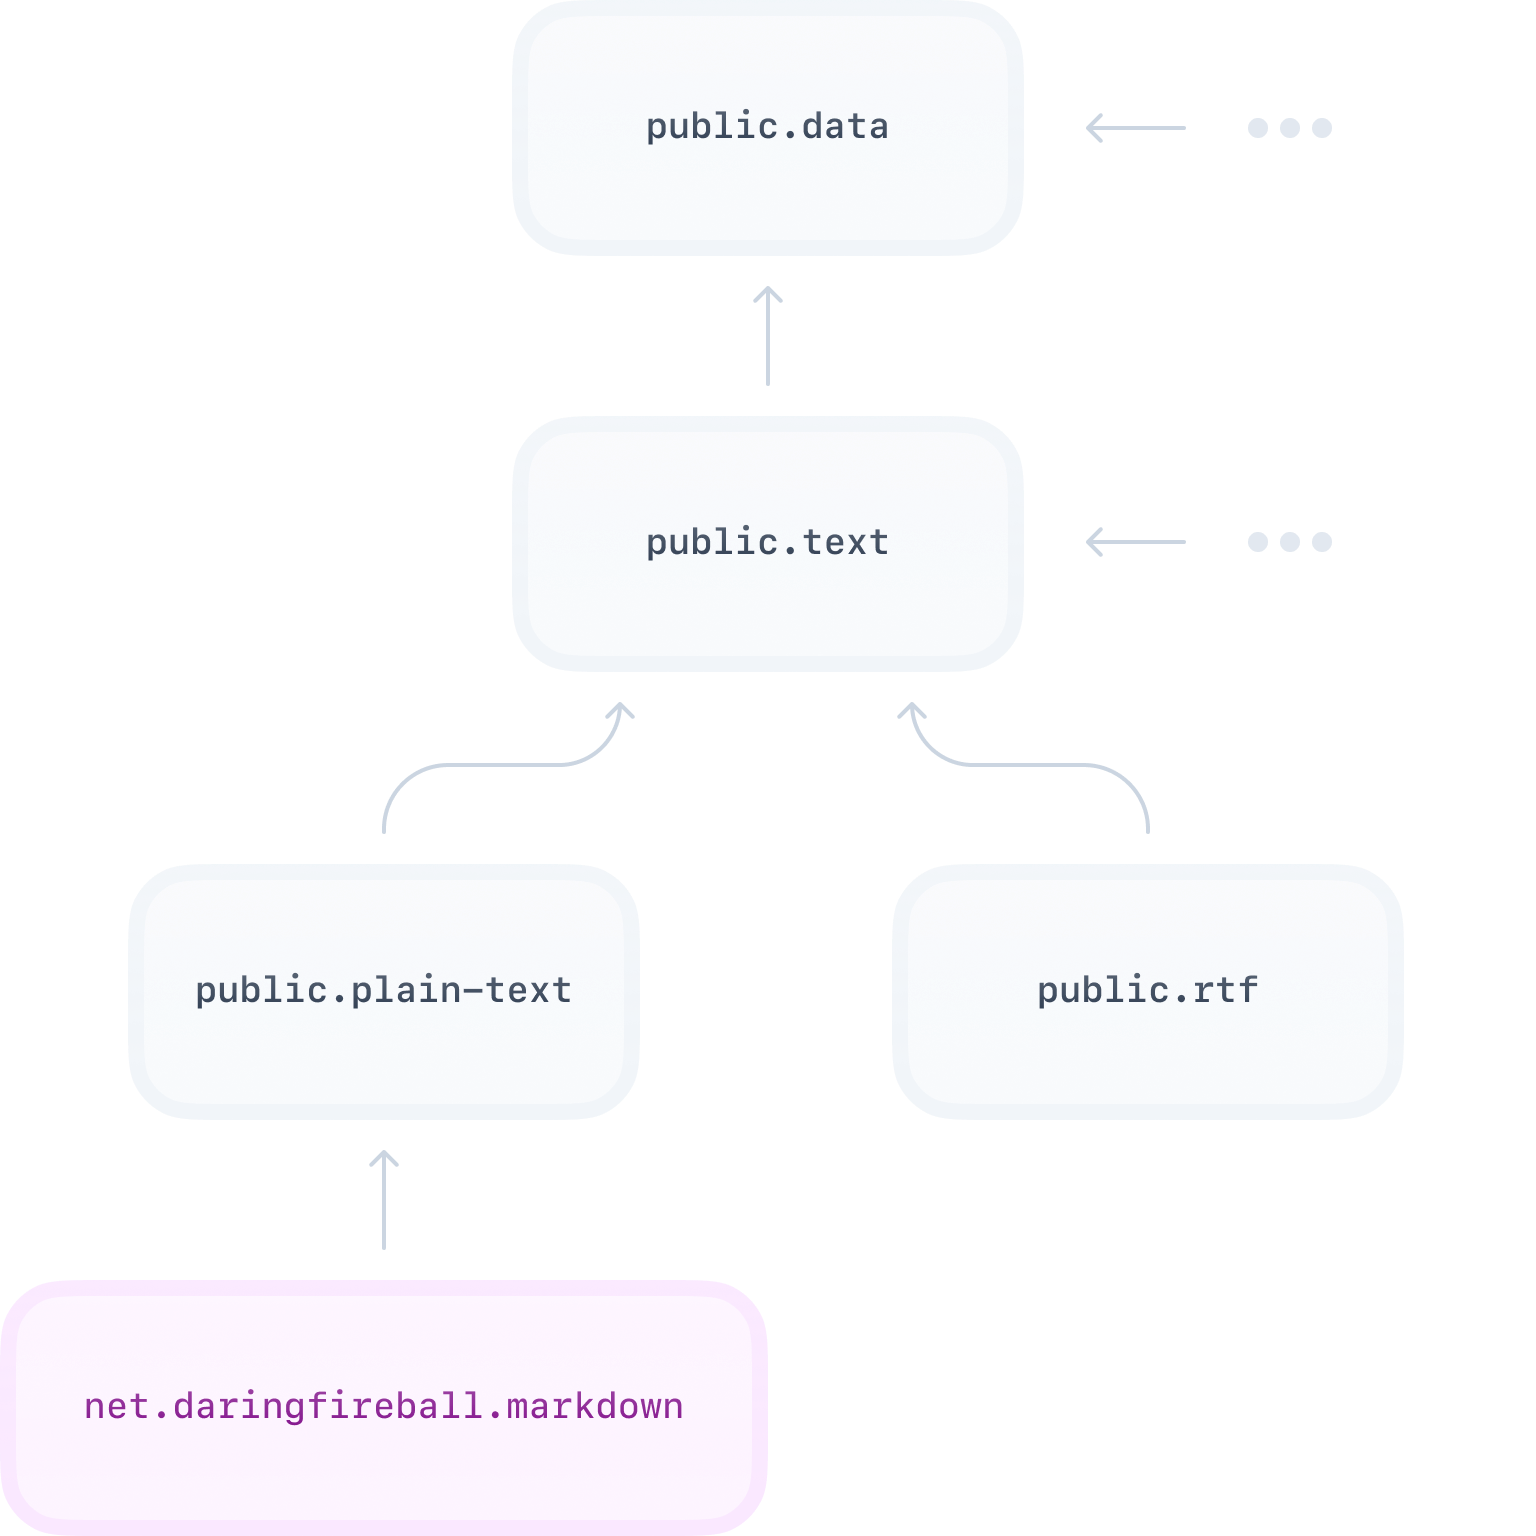 A diagram showing the hierarchical structure of UTIs. At the top is “public.data”, below it “public.text”. Then it splits to “public.plain-text” and “public.rtf”. Below “public.plain-text” is “net.daringfireball.markdown”.